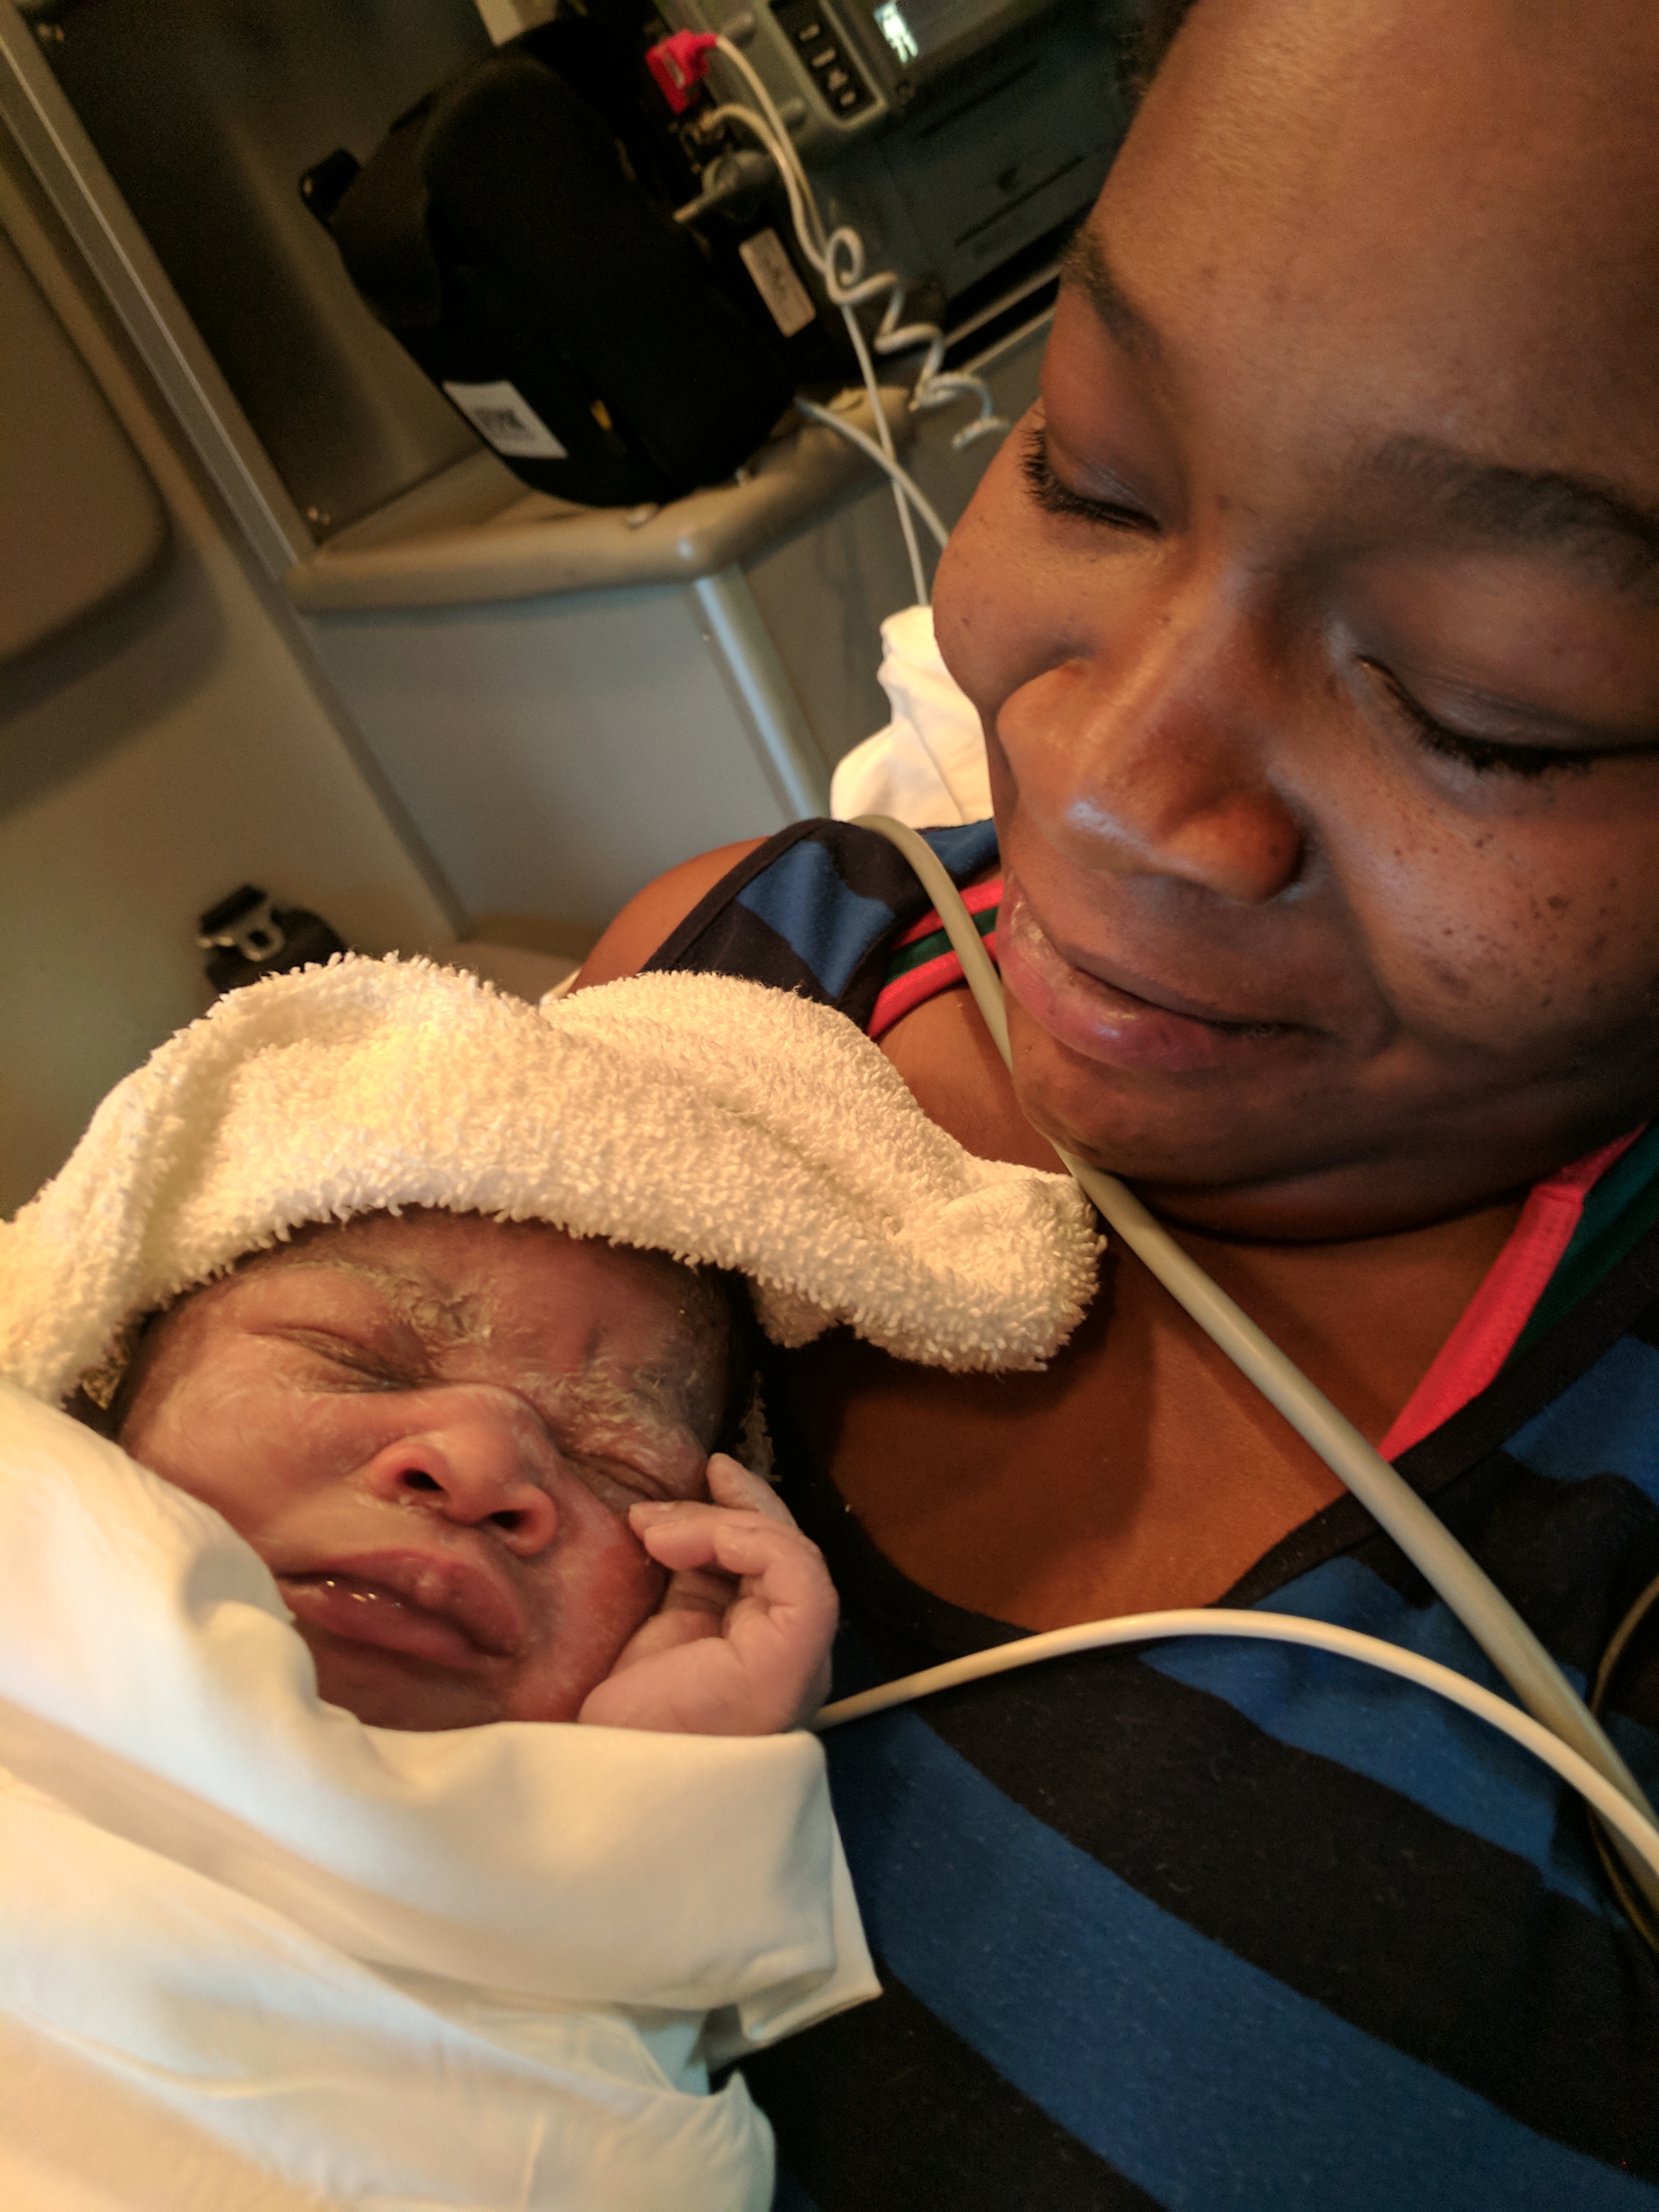 FIREFIGHTERS HELP A MOTHER GIVE BIRTH TO A BABY GIRL